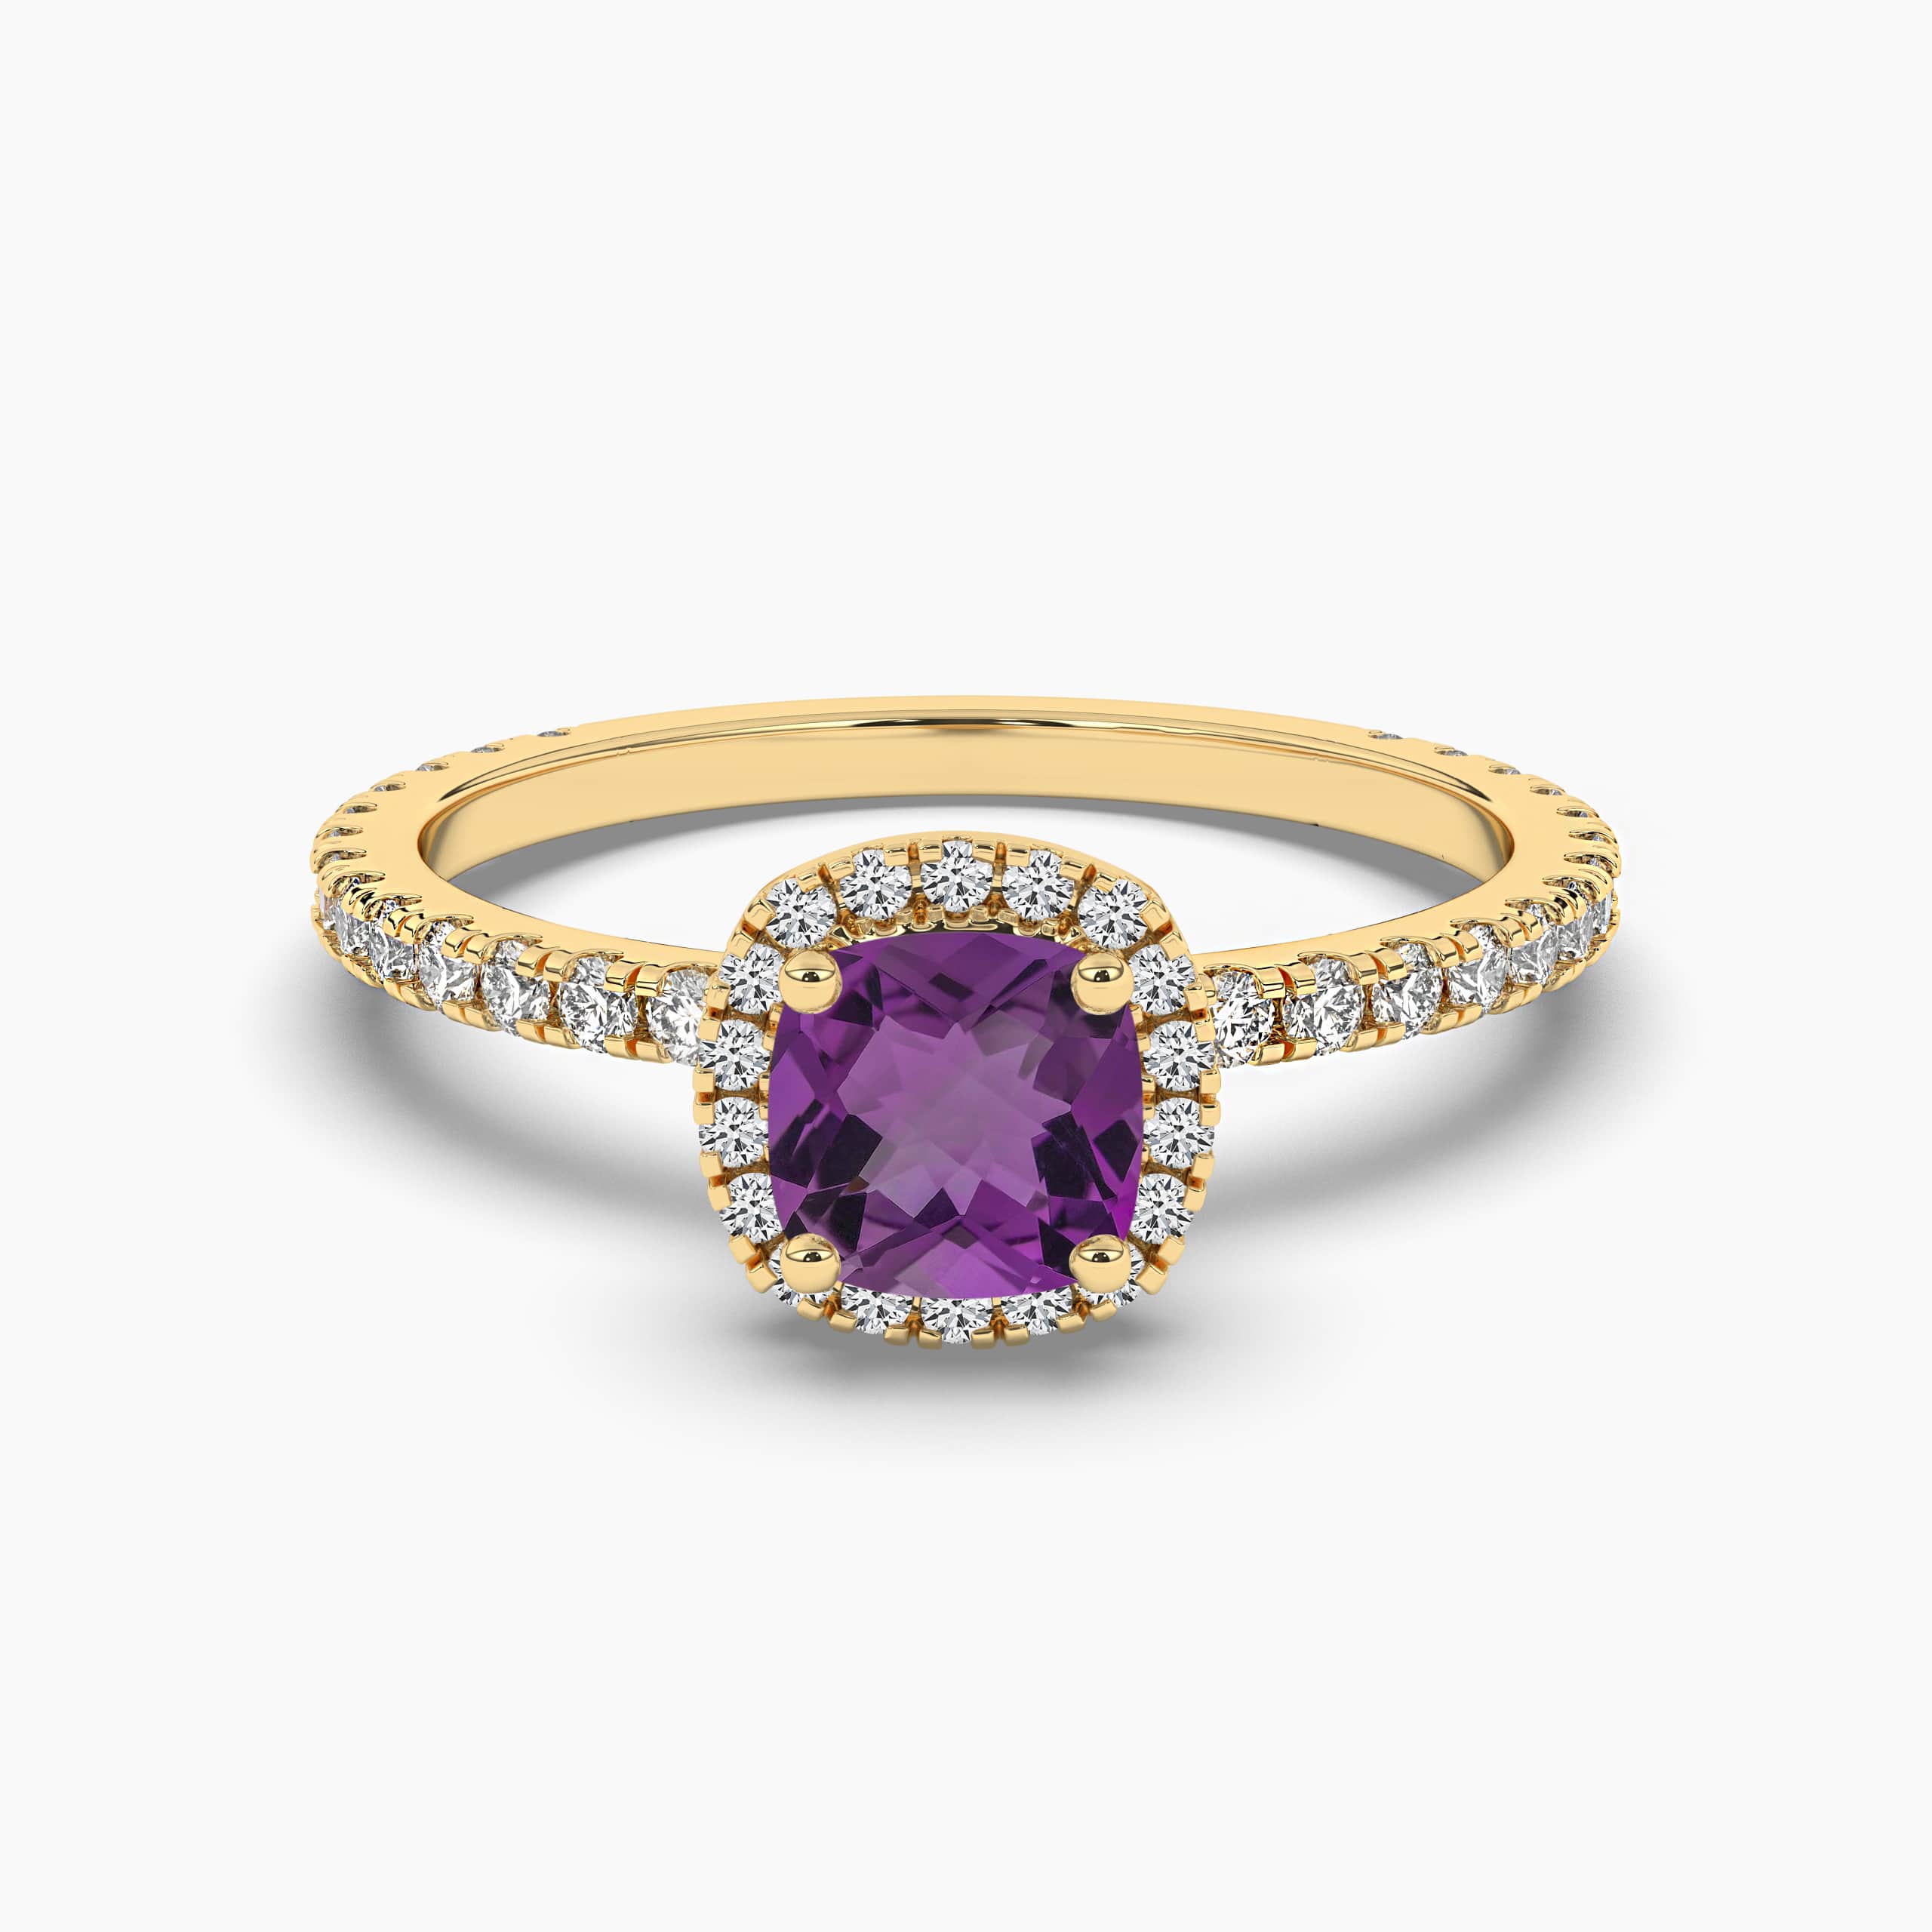 Cushion Cut Amethyst and Diamond Halo Ring in Yellow Gold